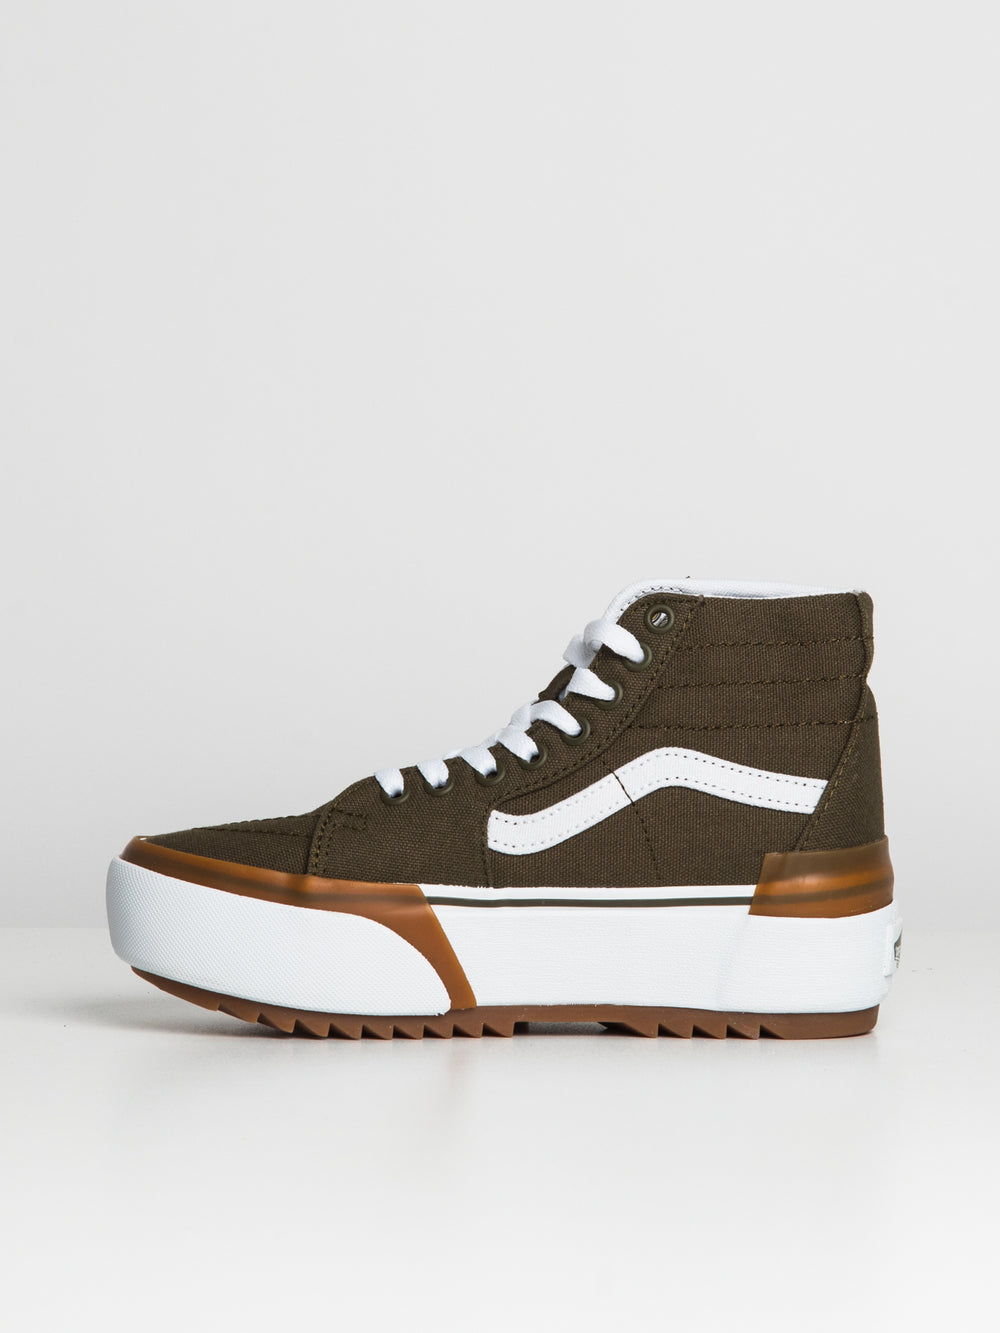 WOMENS VANS SK8 HI TAPERED STACKED CANVAS